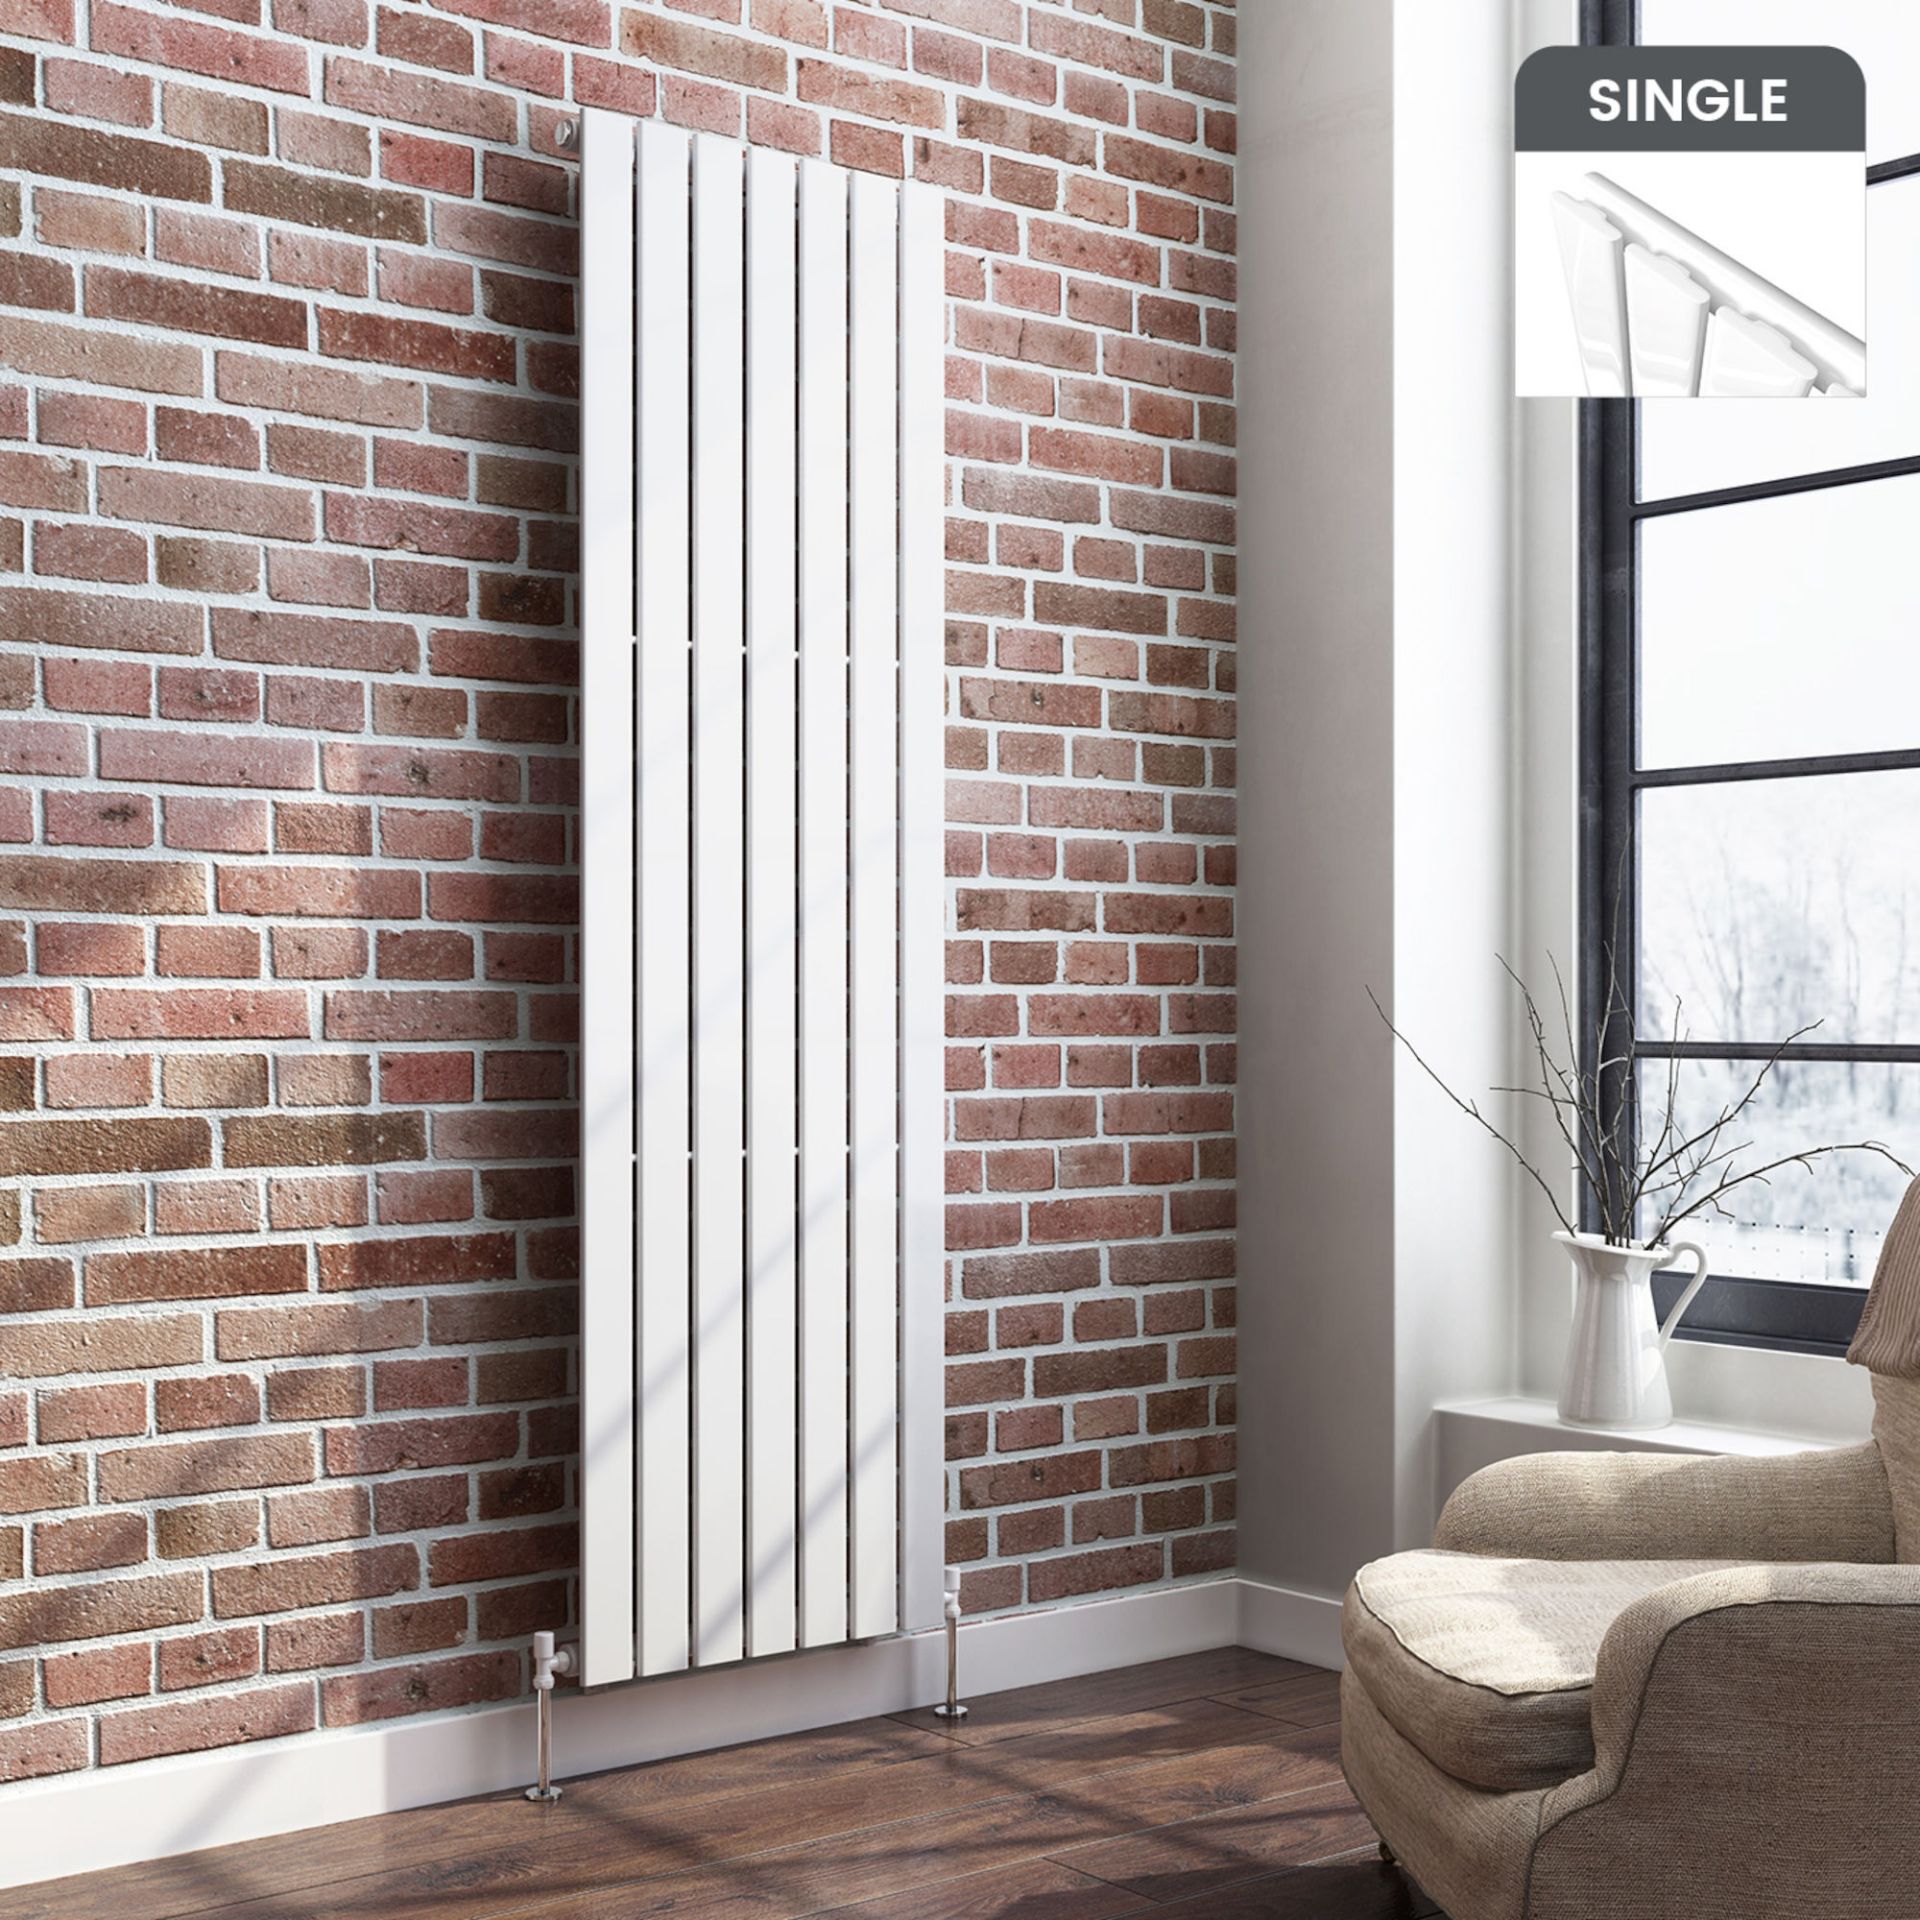 (ED57) 1800x532mm Gloss White Single Flat Panel Vertical Radiator. RRP £269.00. Made from high